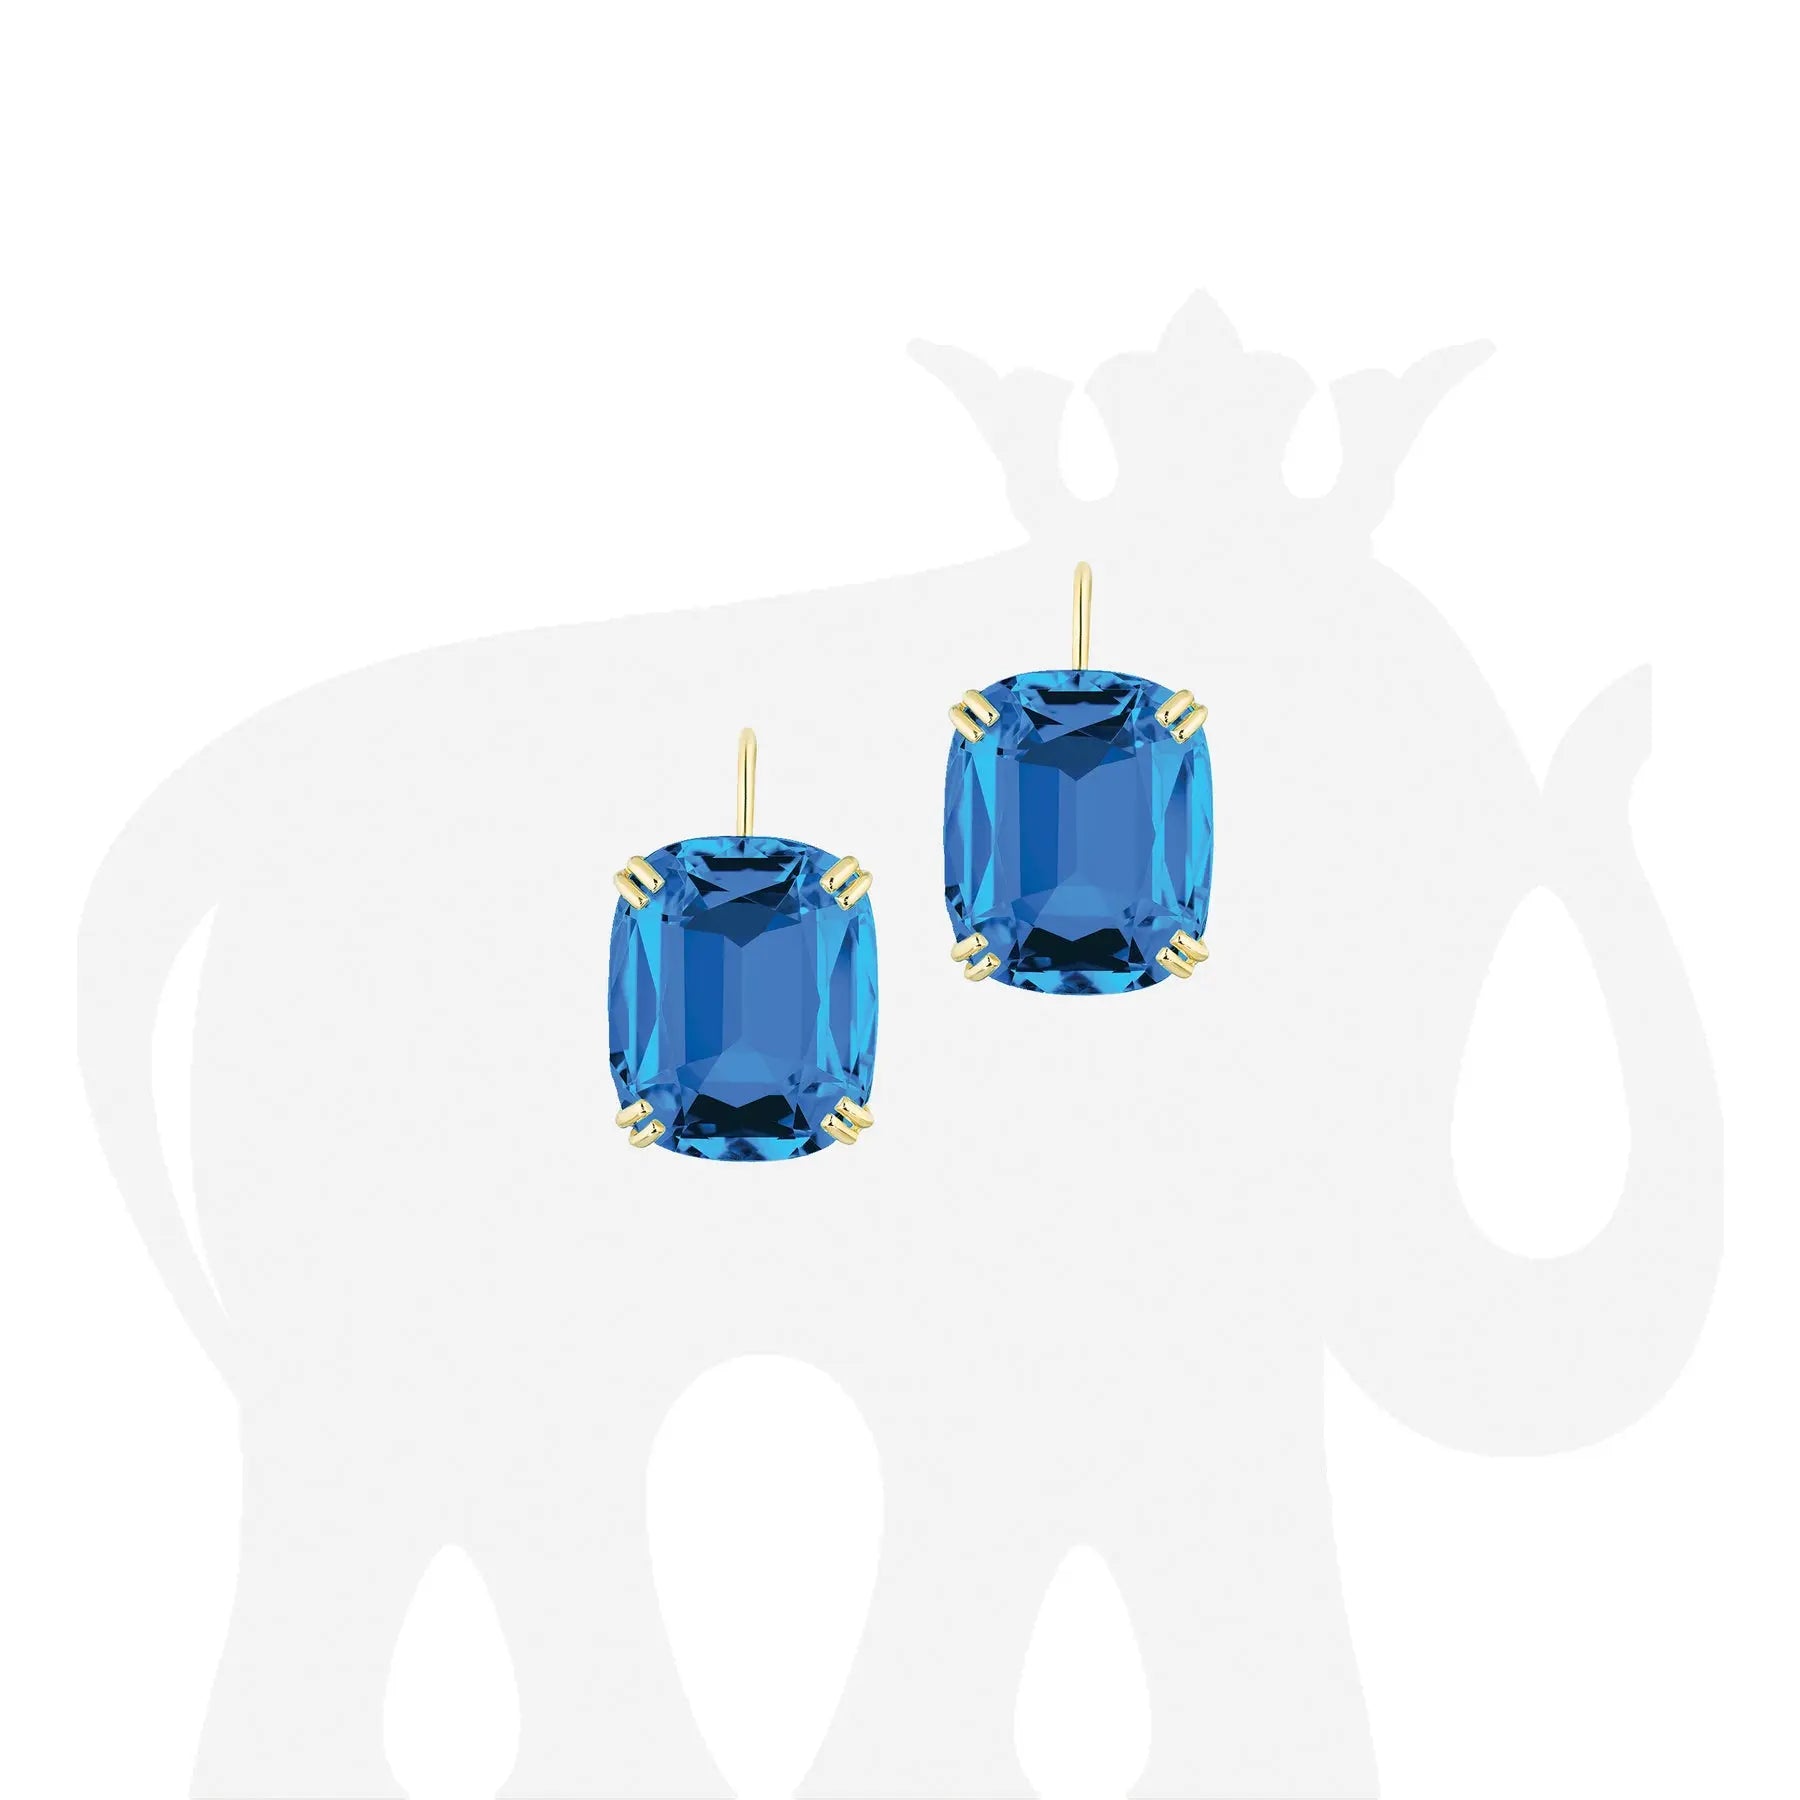 Gossip' London Blue Topaz Cushion Earrings on Wire. The earrings are gorgeous. They are set in 18k yellow gold. The stones measure ~ 18x15mm and carat weight is ~29.05 ctts